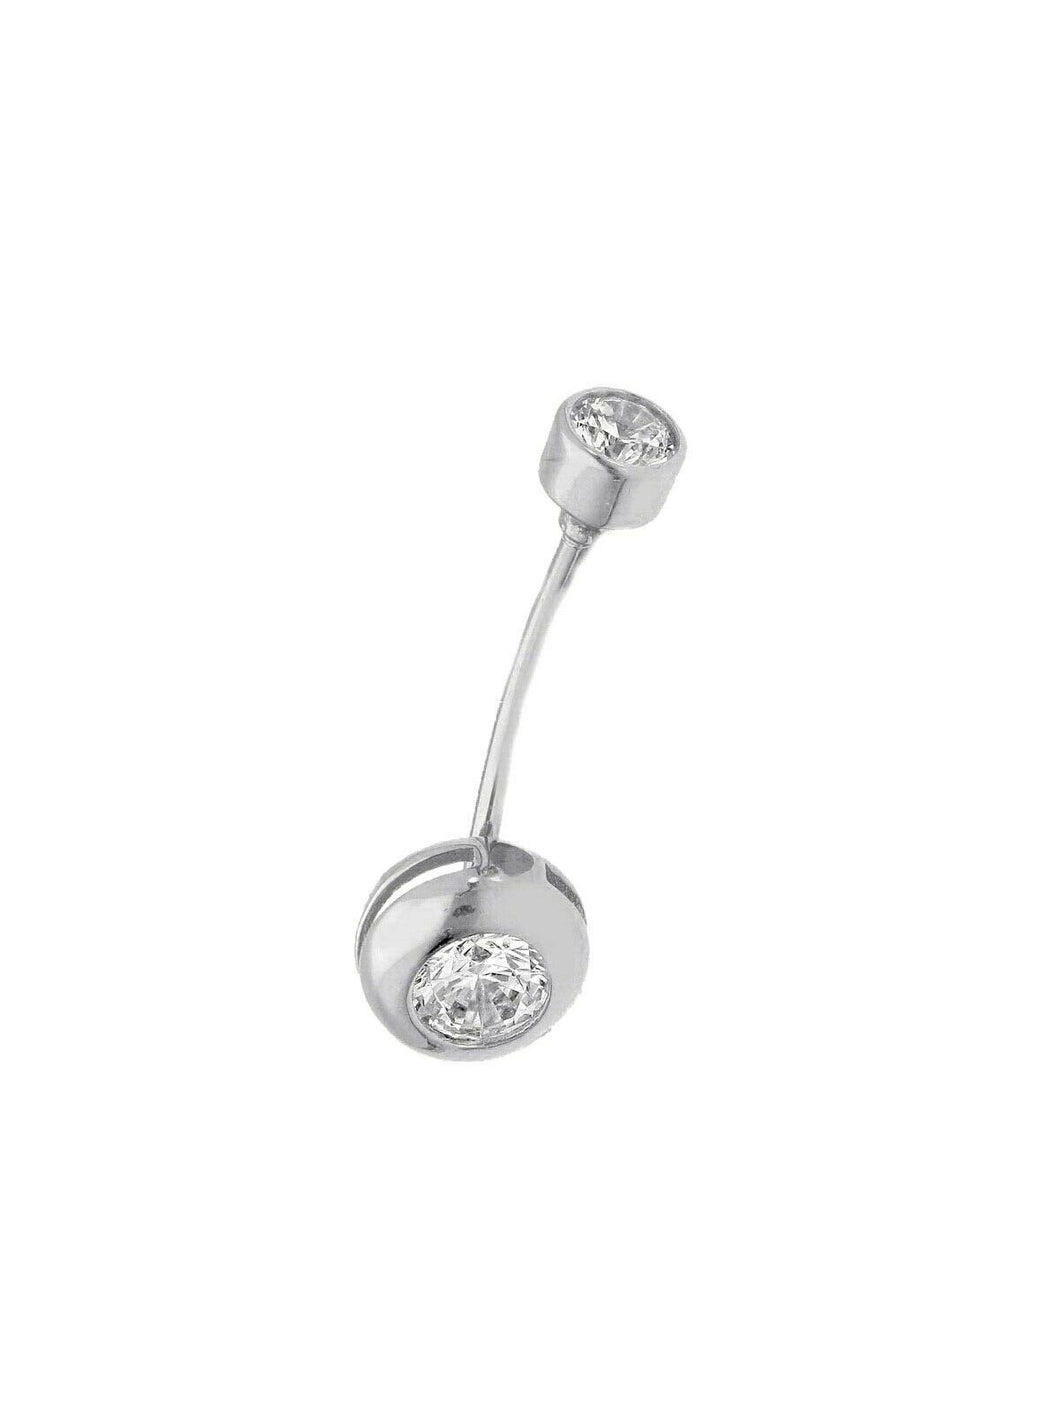 18K WHITE GOLD PIERCING BARBELL CURVE BANANA BELLY BODY WITH 4-6mm ZIRCONIA